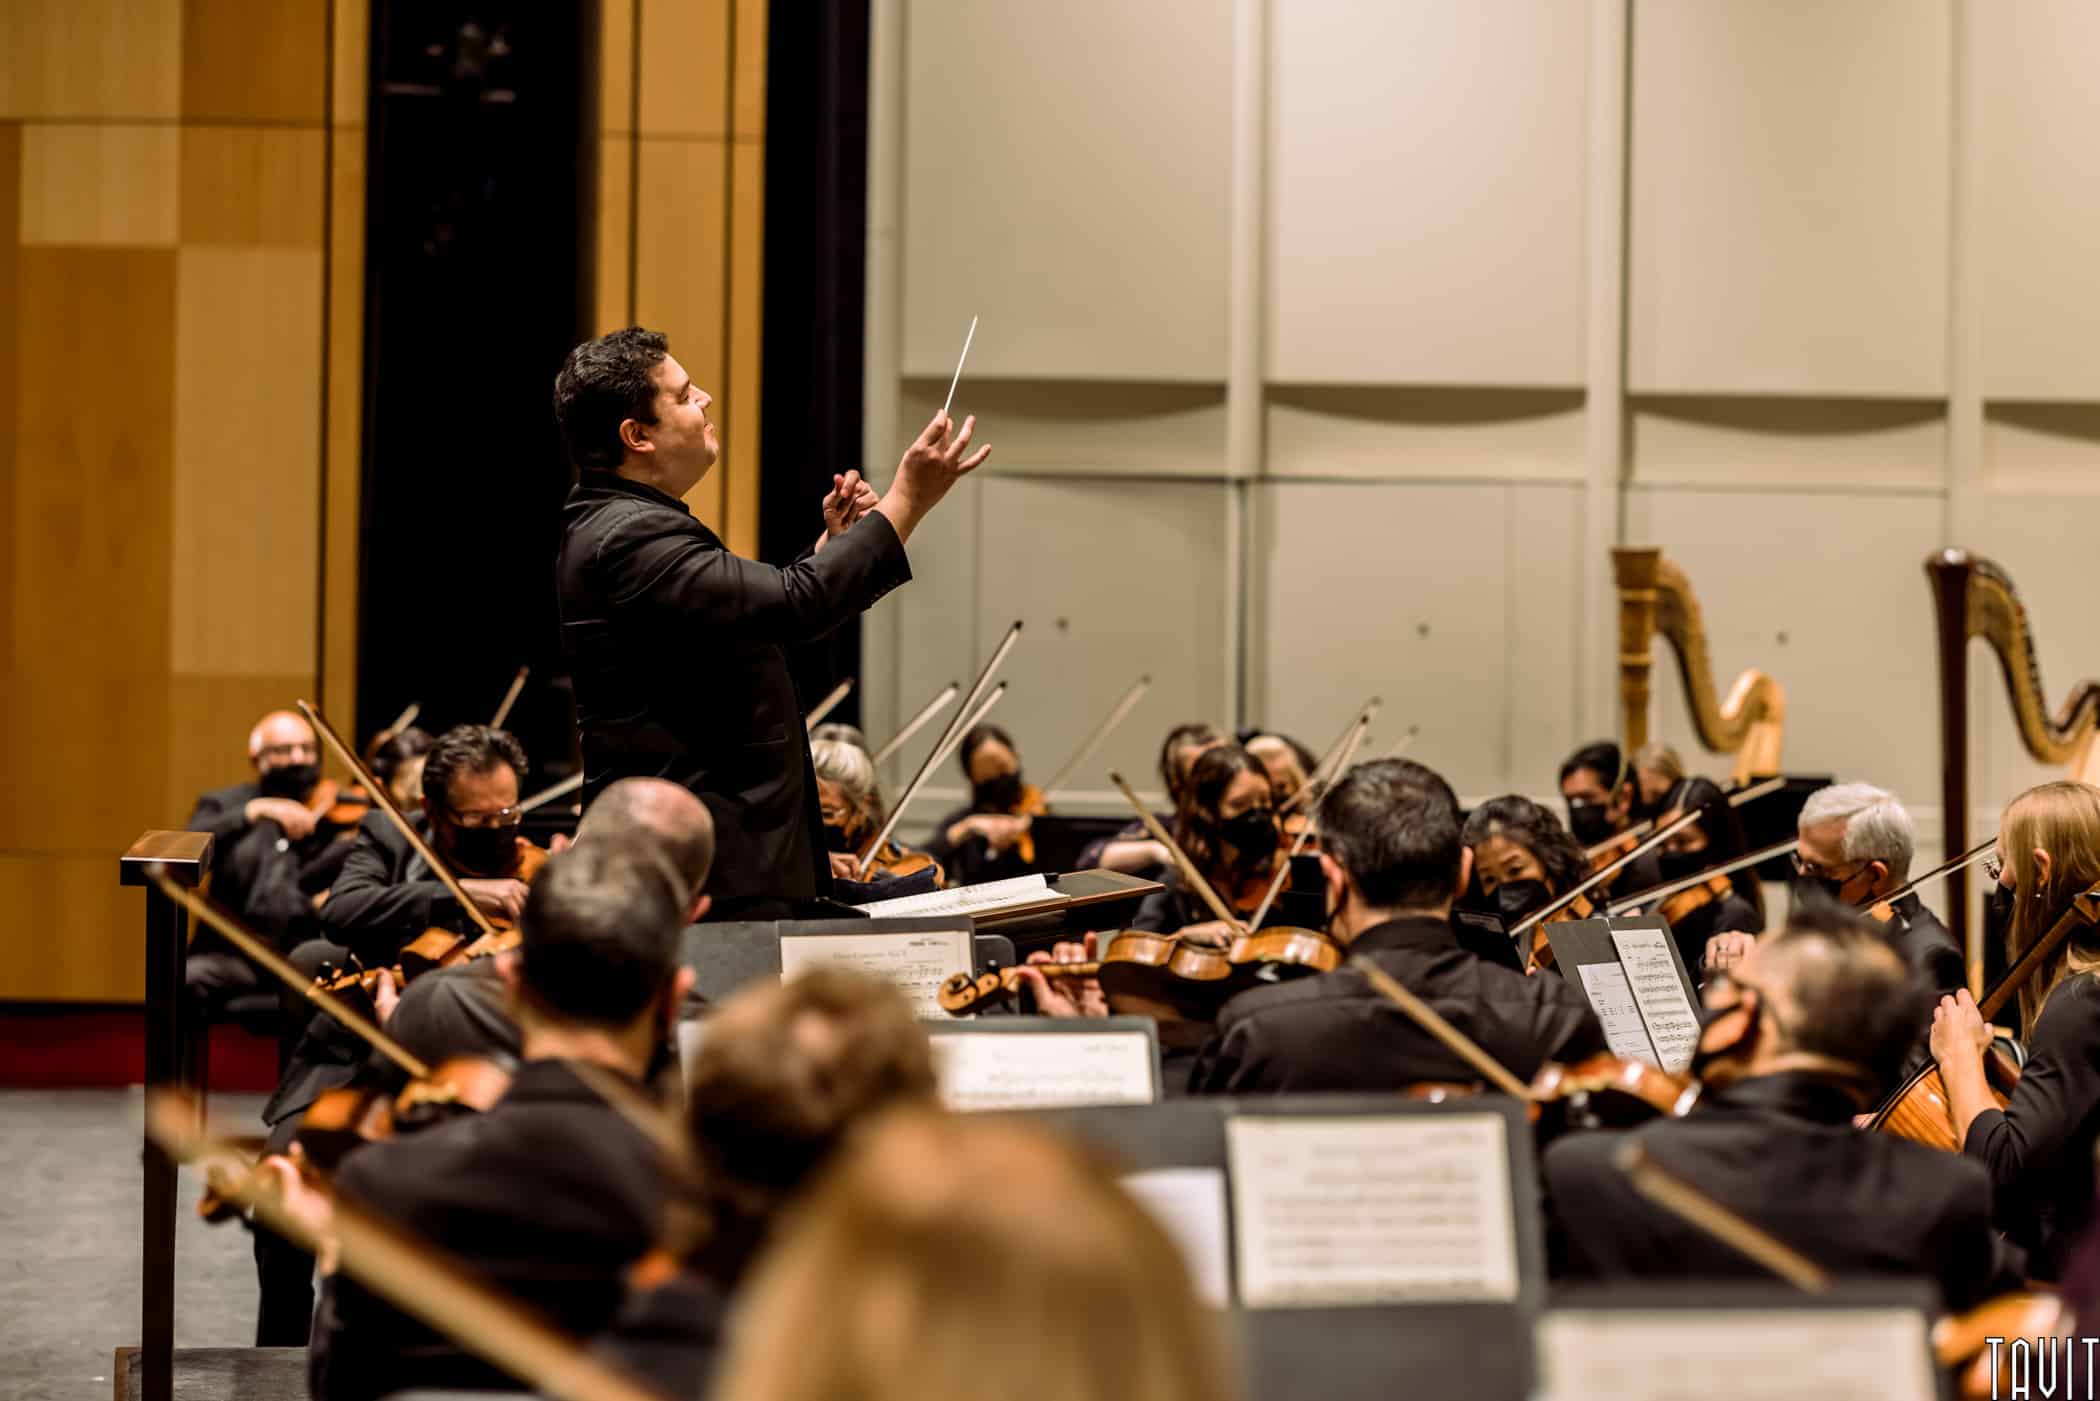 Side view of conductor with arms out in front of orchestra